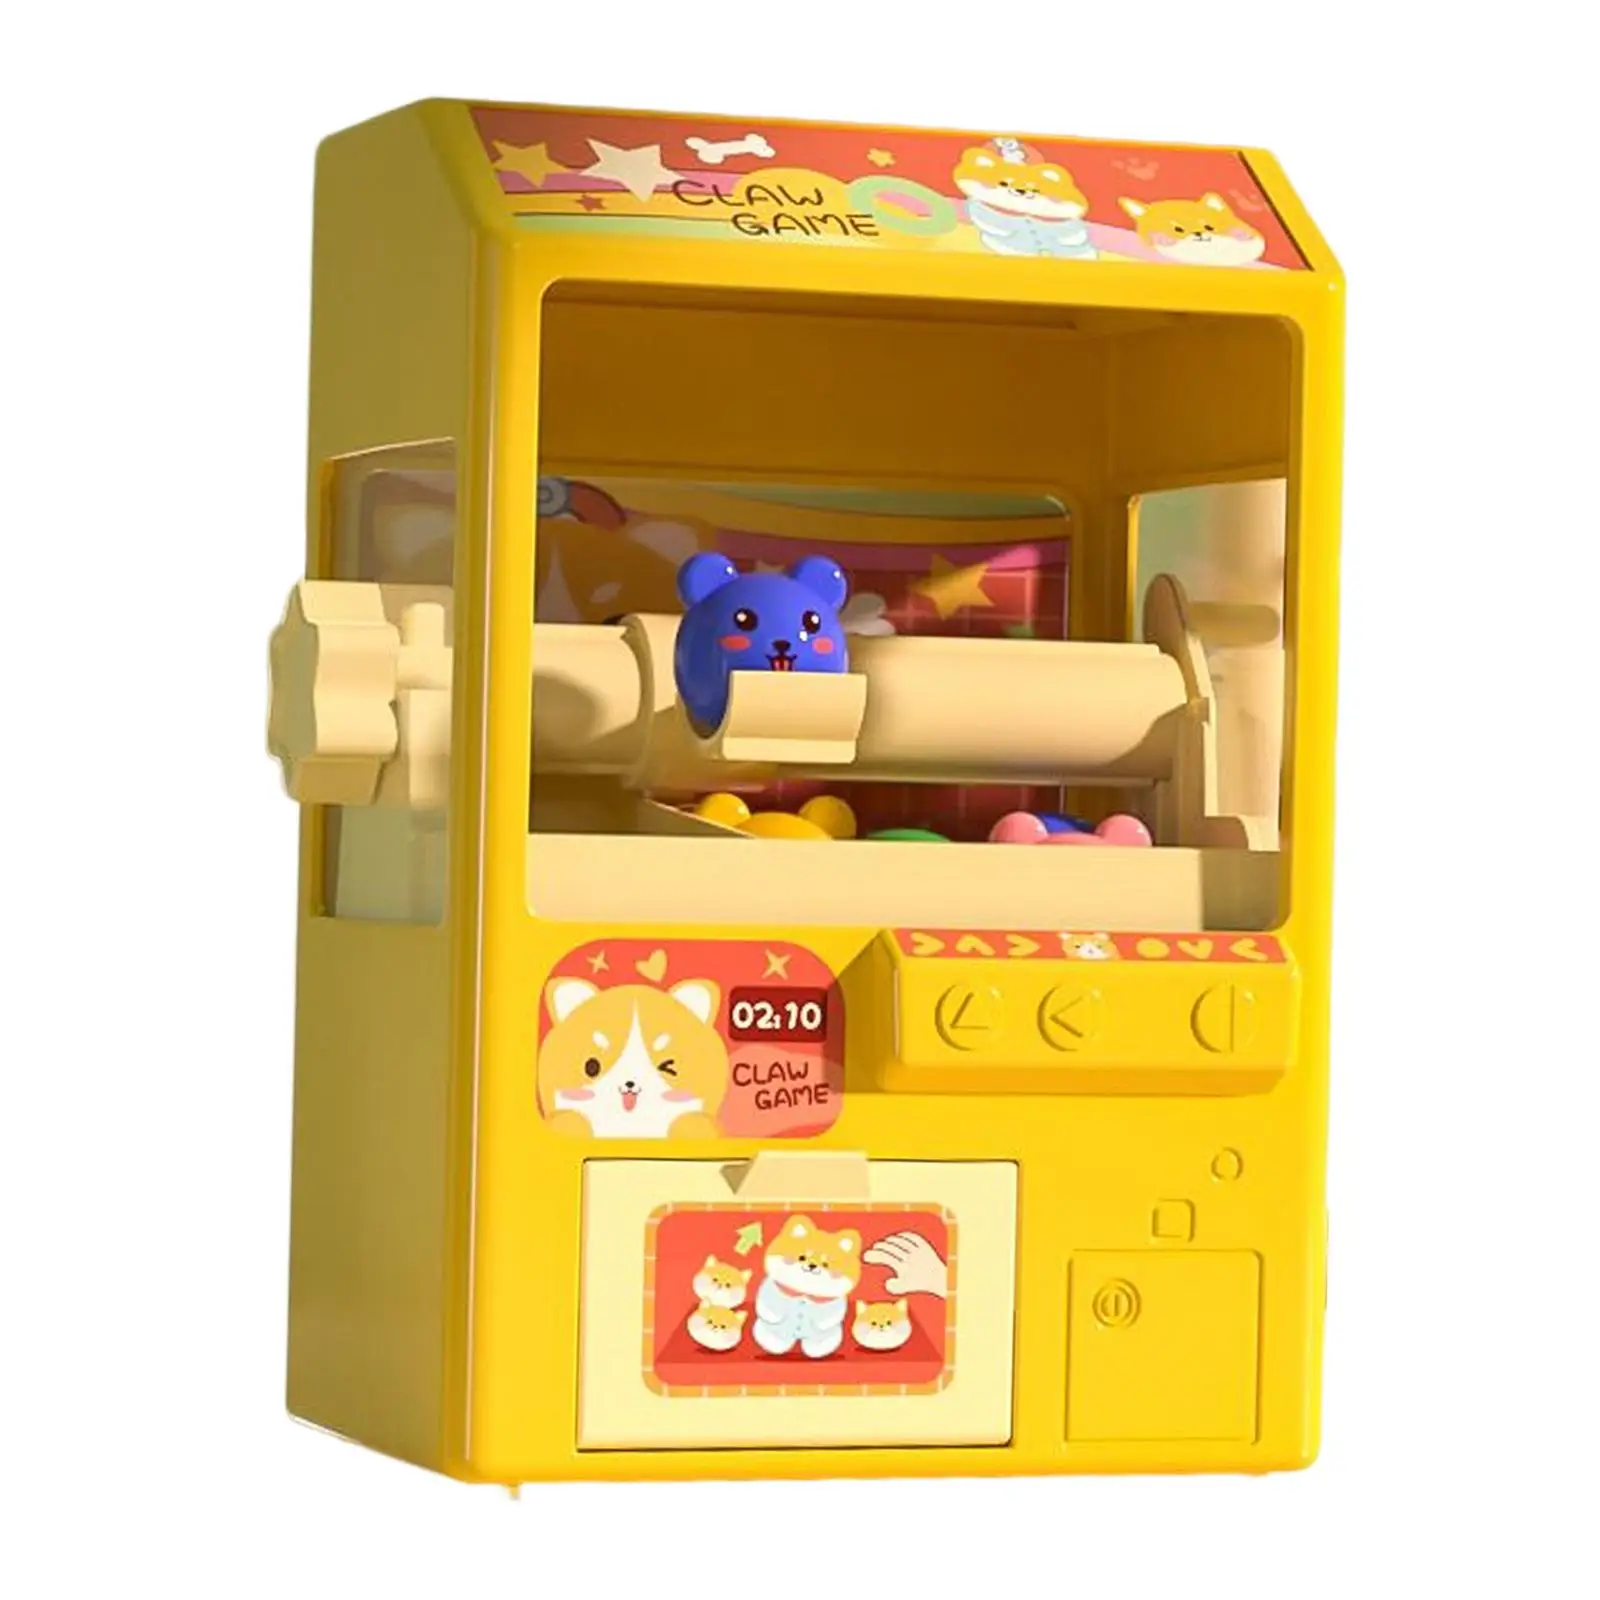 protoyszoom Electronic Claw Machine Claw Machine Game Novelty for Children